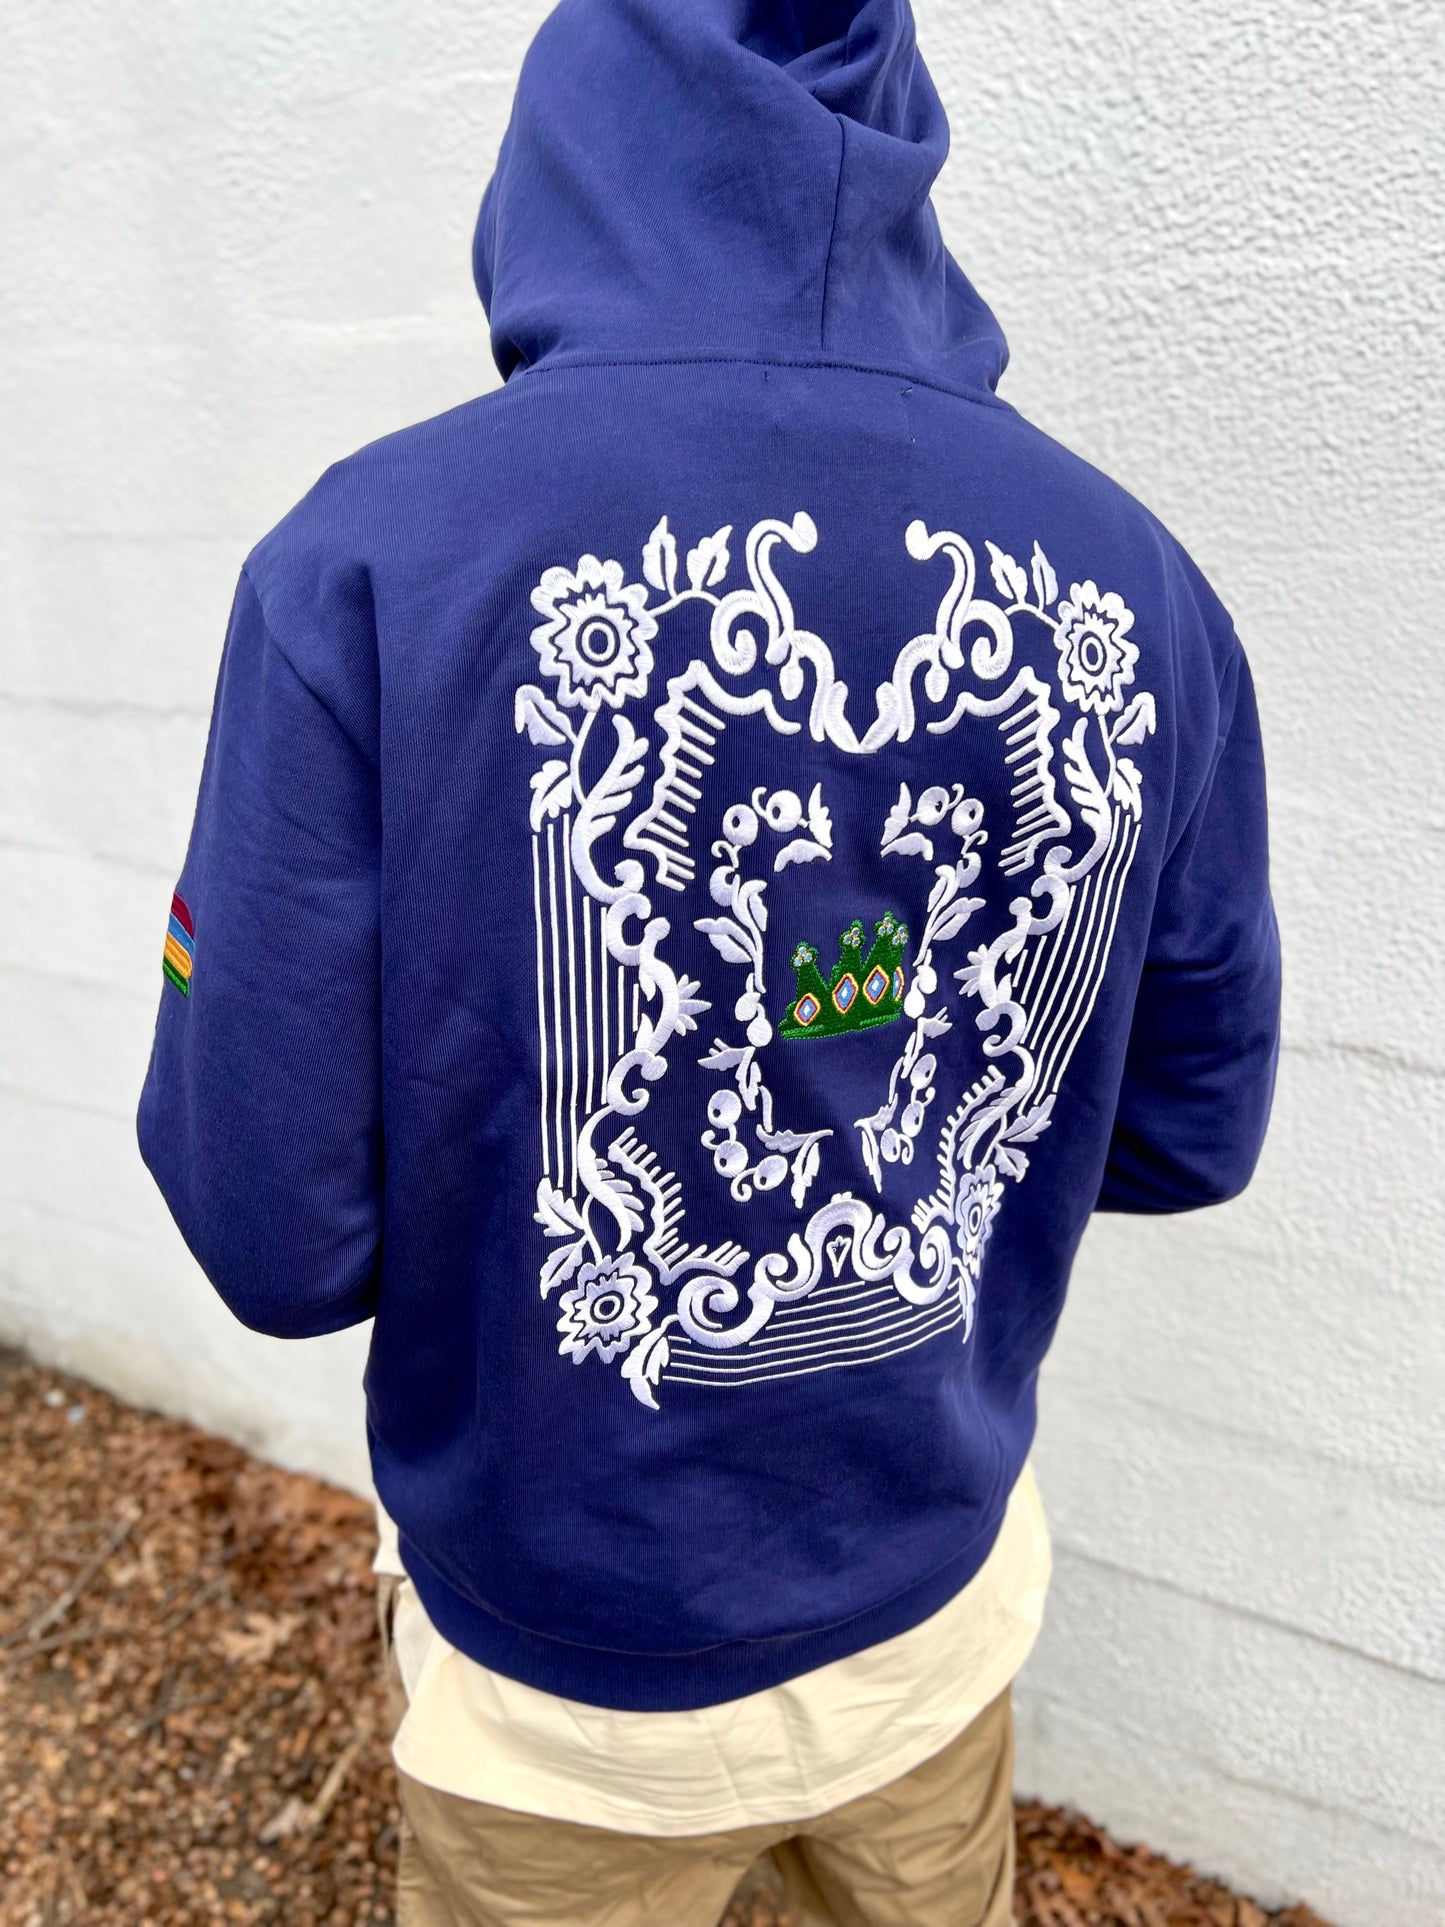 Green Giant Clothing (Blue Victorian Hoody)